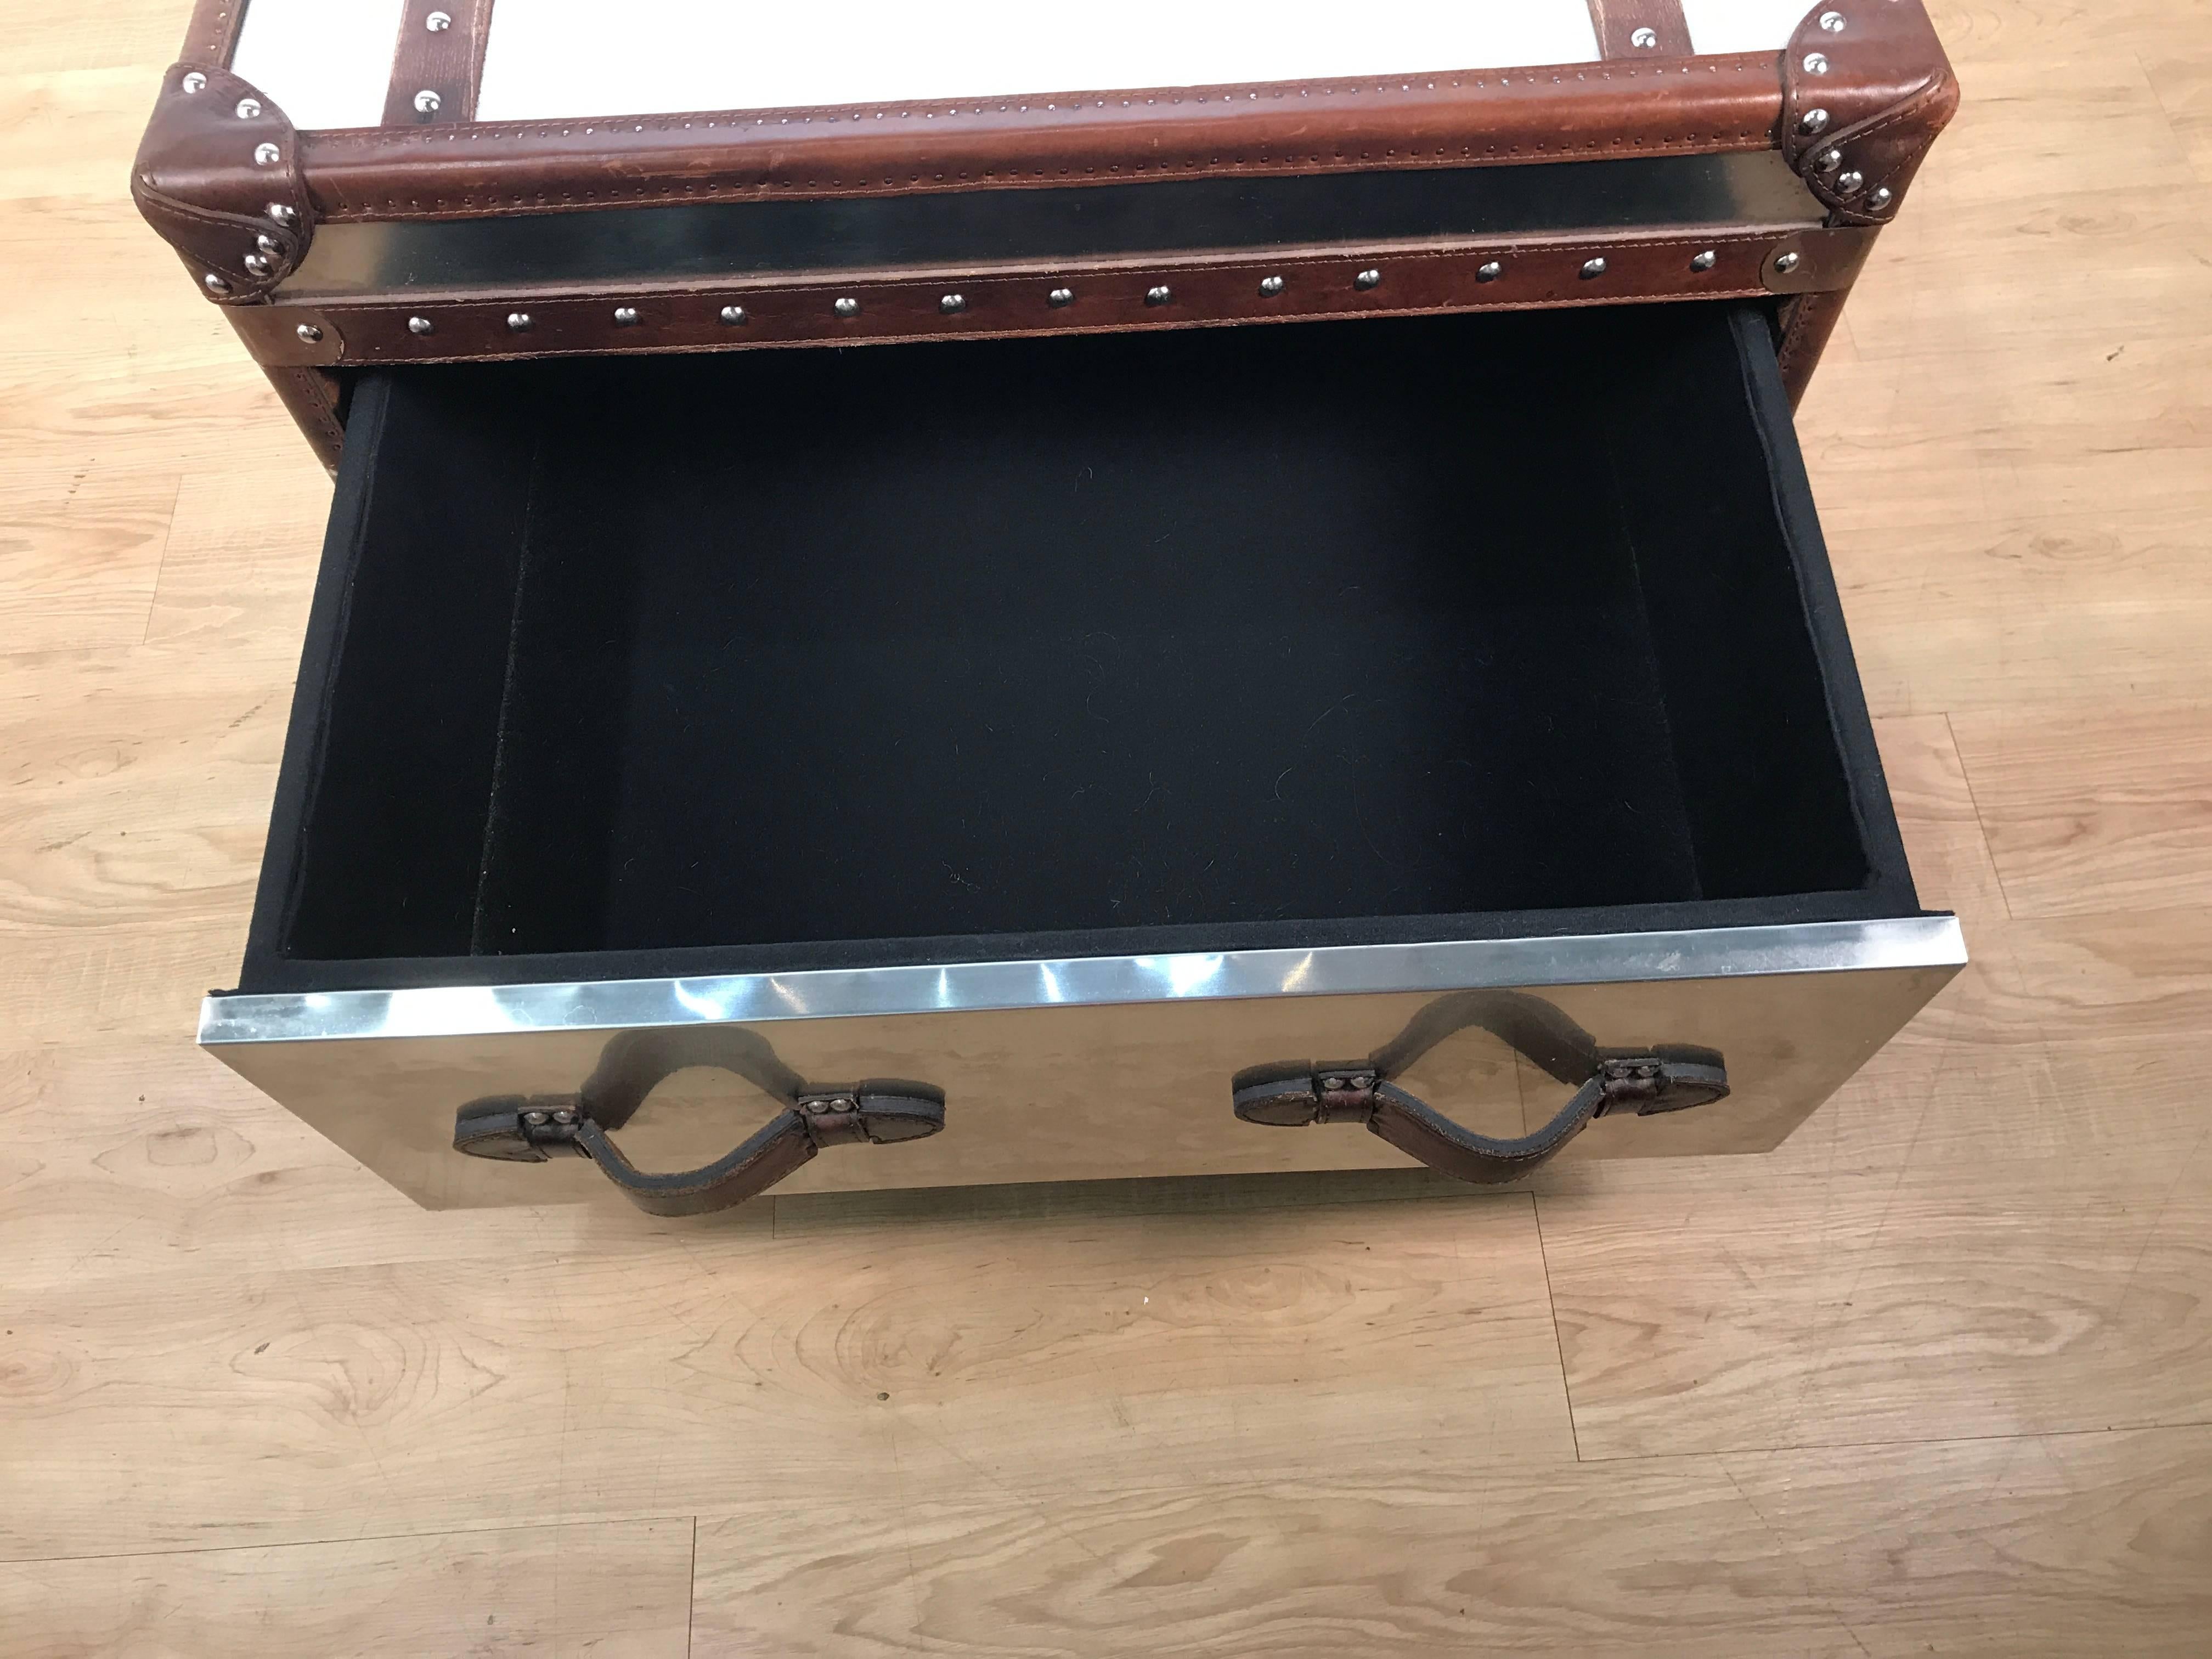 20th Century Stainless Steel and Leather Bound Trunk Coffee Table with Two Side Drawers